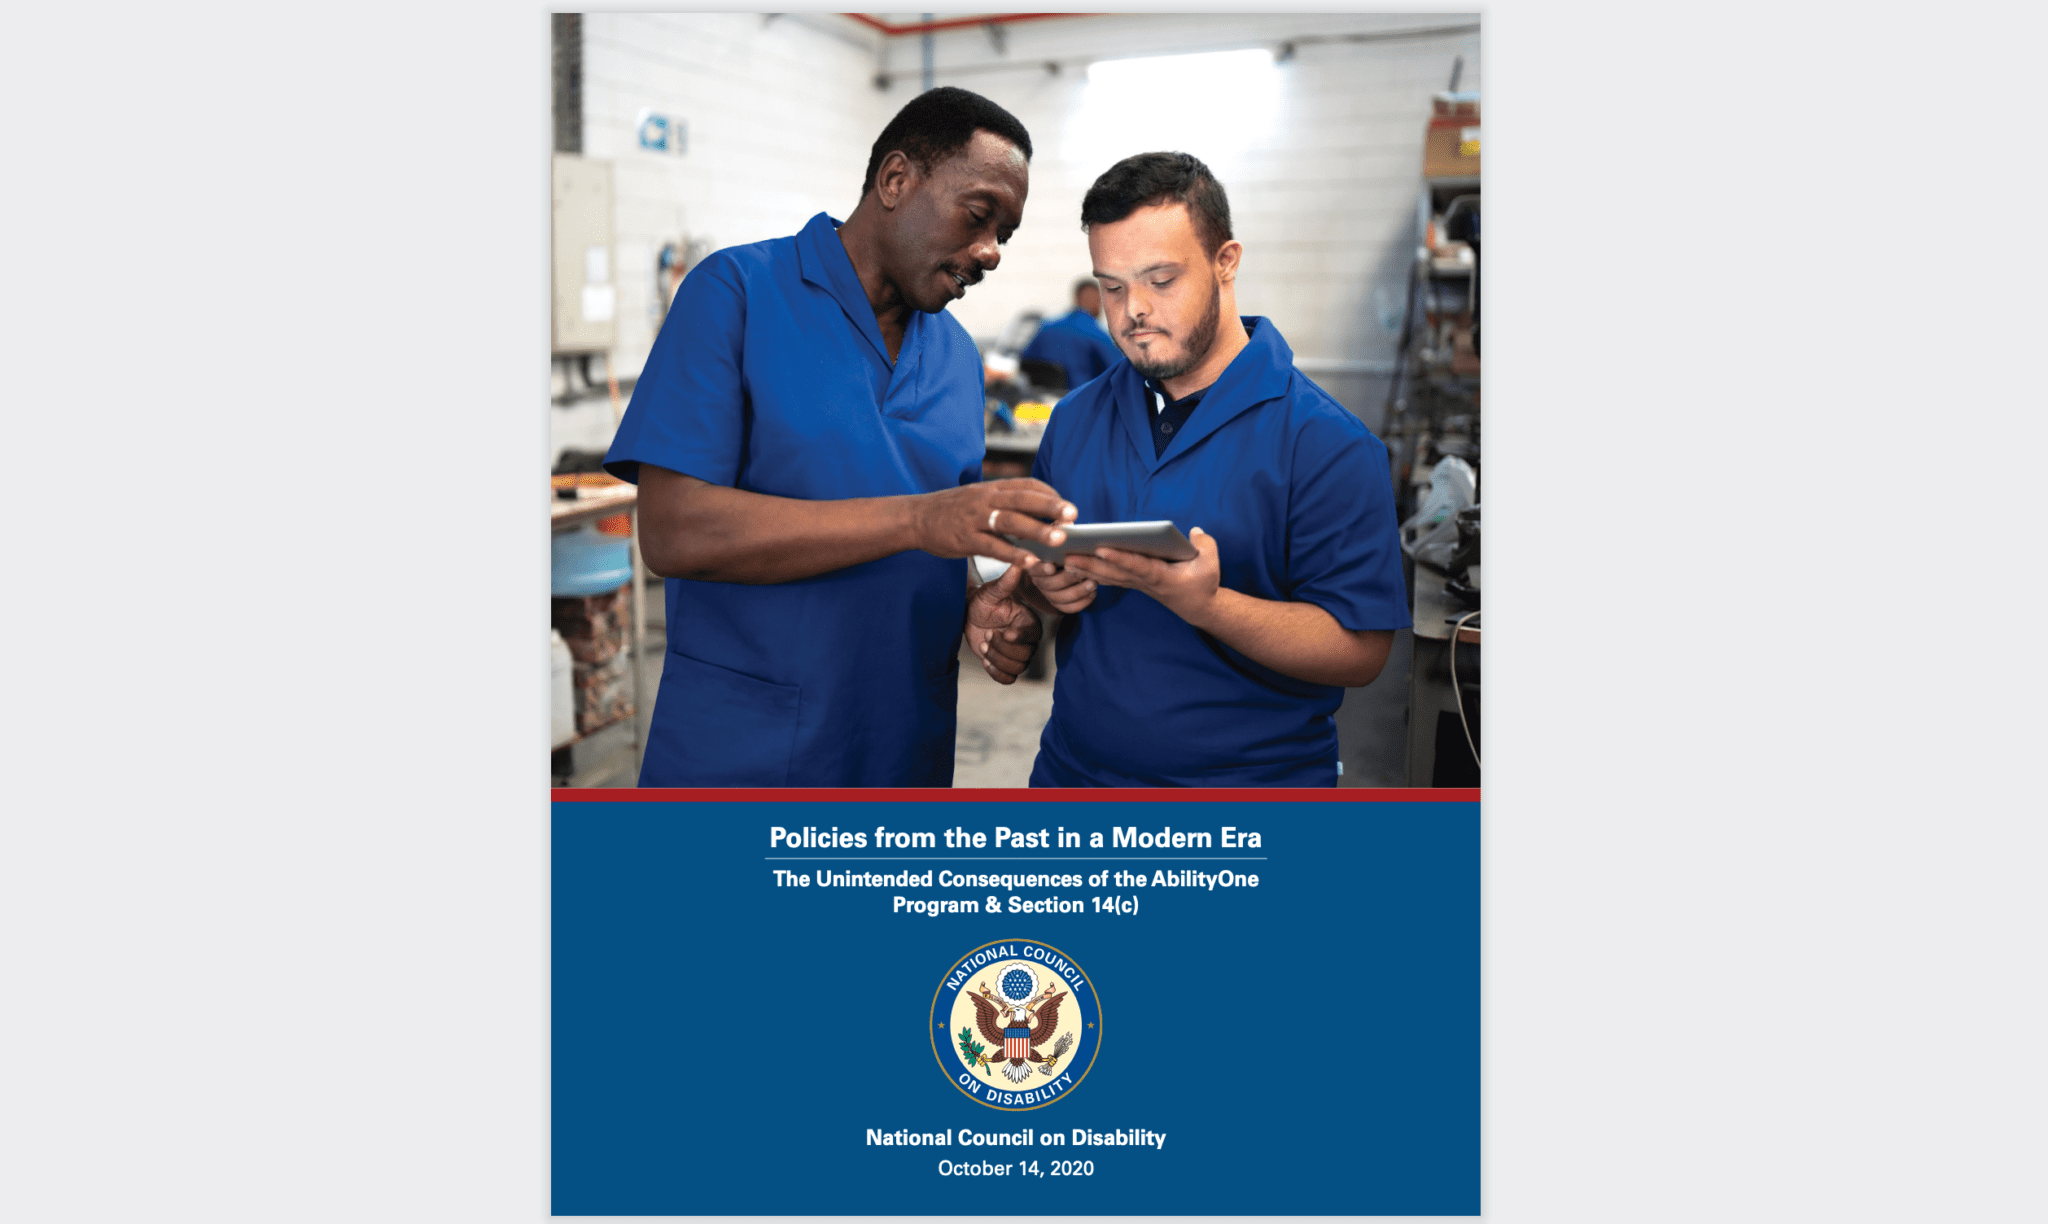 Cover of NCD report “Policies from the Past in a Modern Era: The Unintended Consequences of the AbilityOne Program & Section 14(c)“ Two male work colleagues, one with Down syndrome, use a digital tablet at work in an industrial setting.